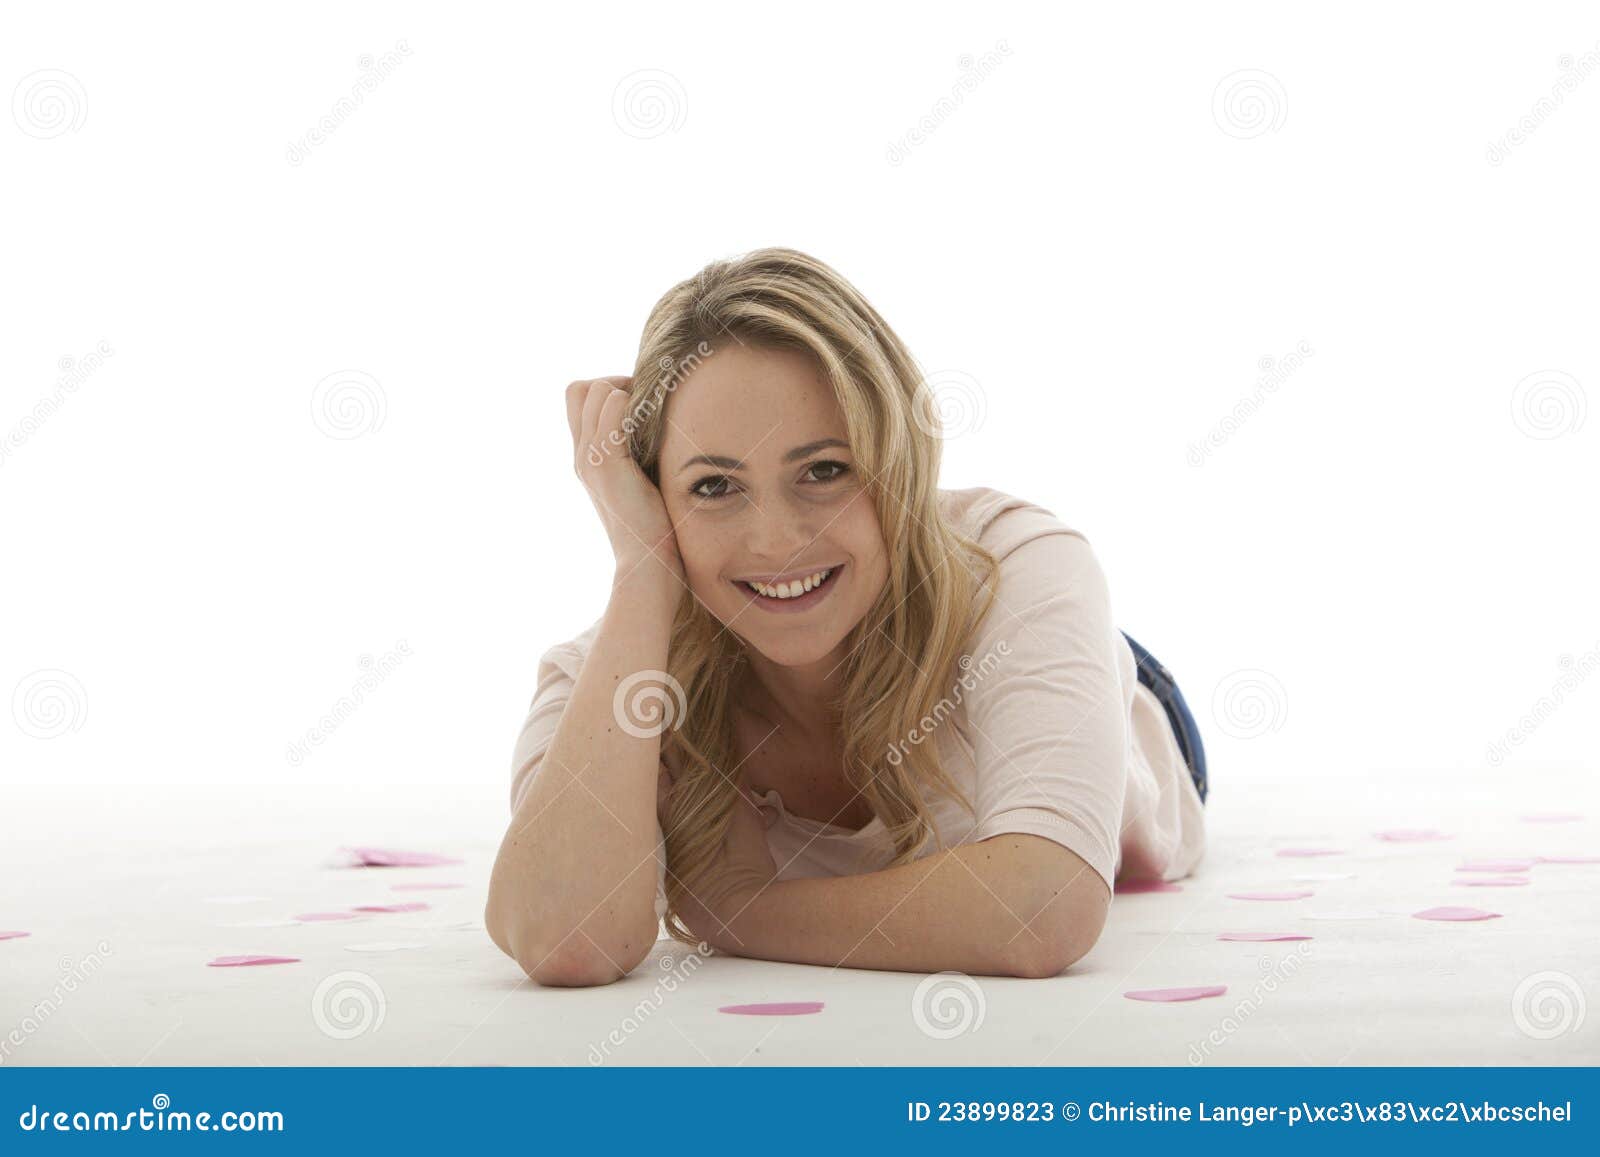 teen lying on stomach Blonde